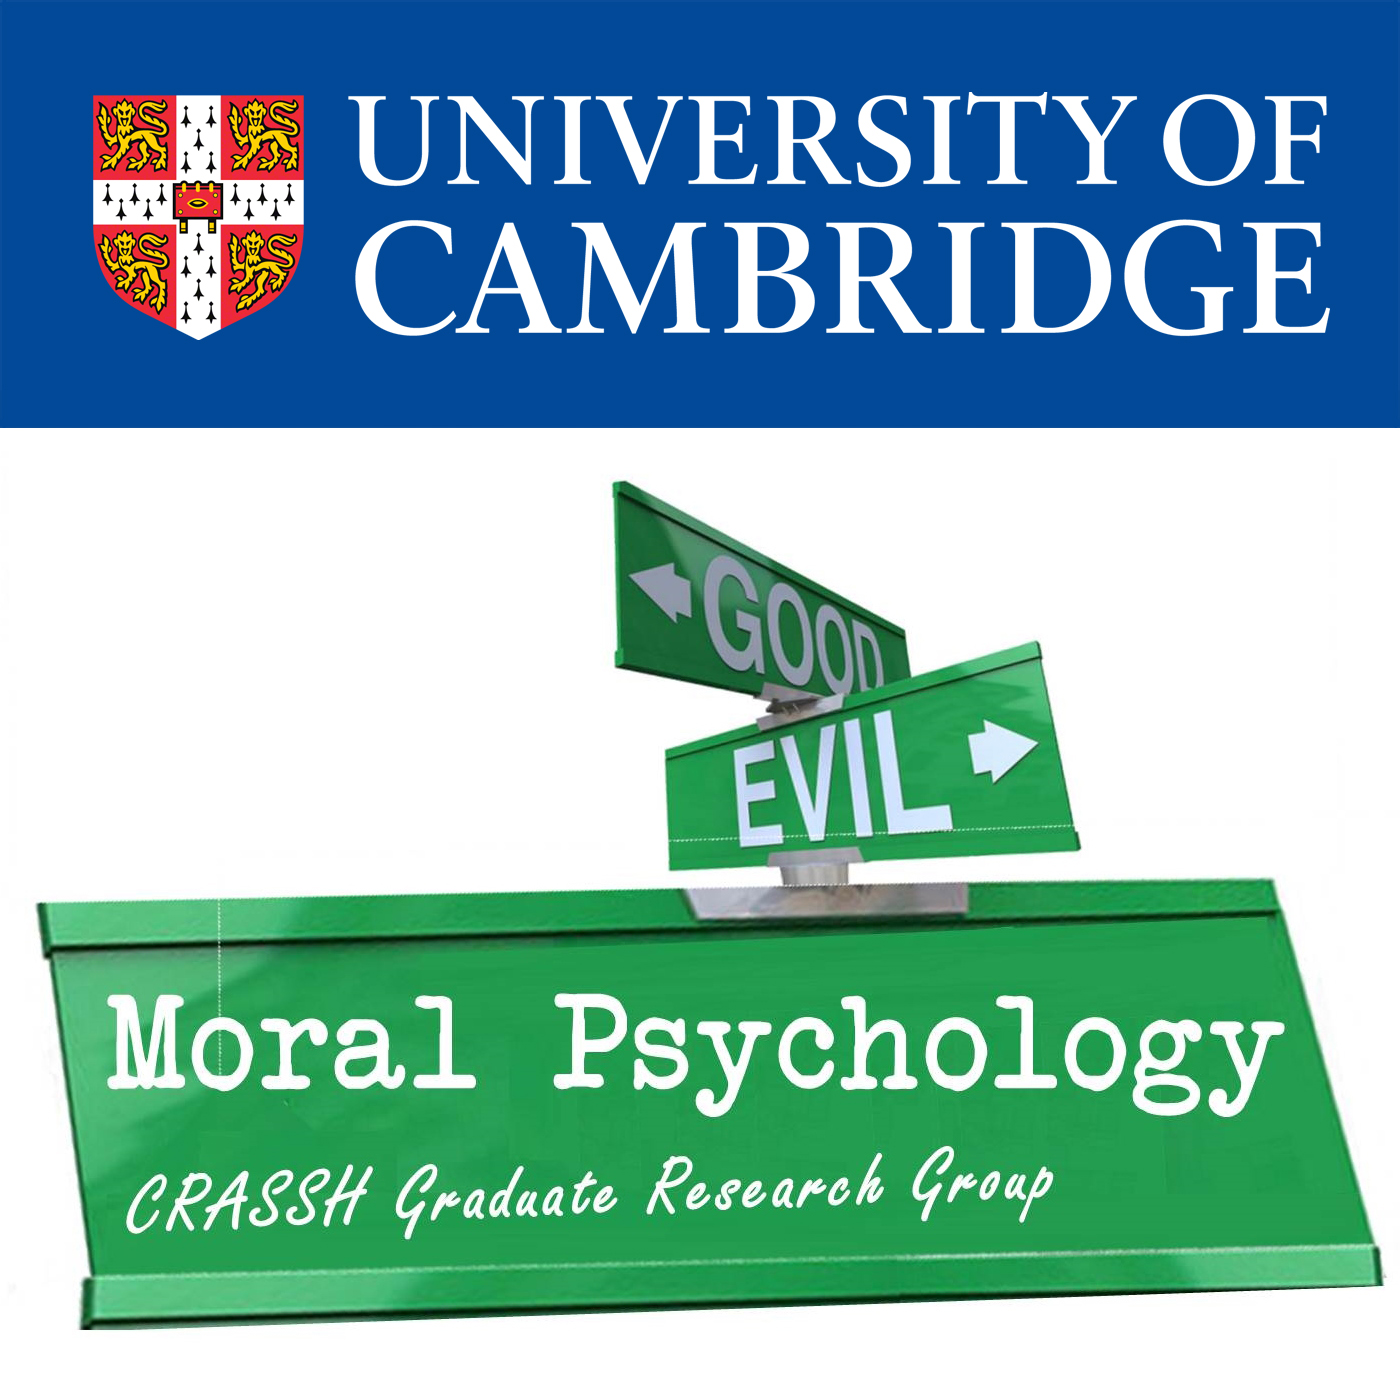 Moral Psychology Research Group's image